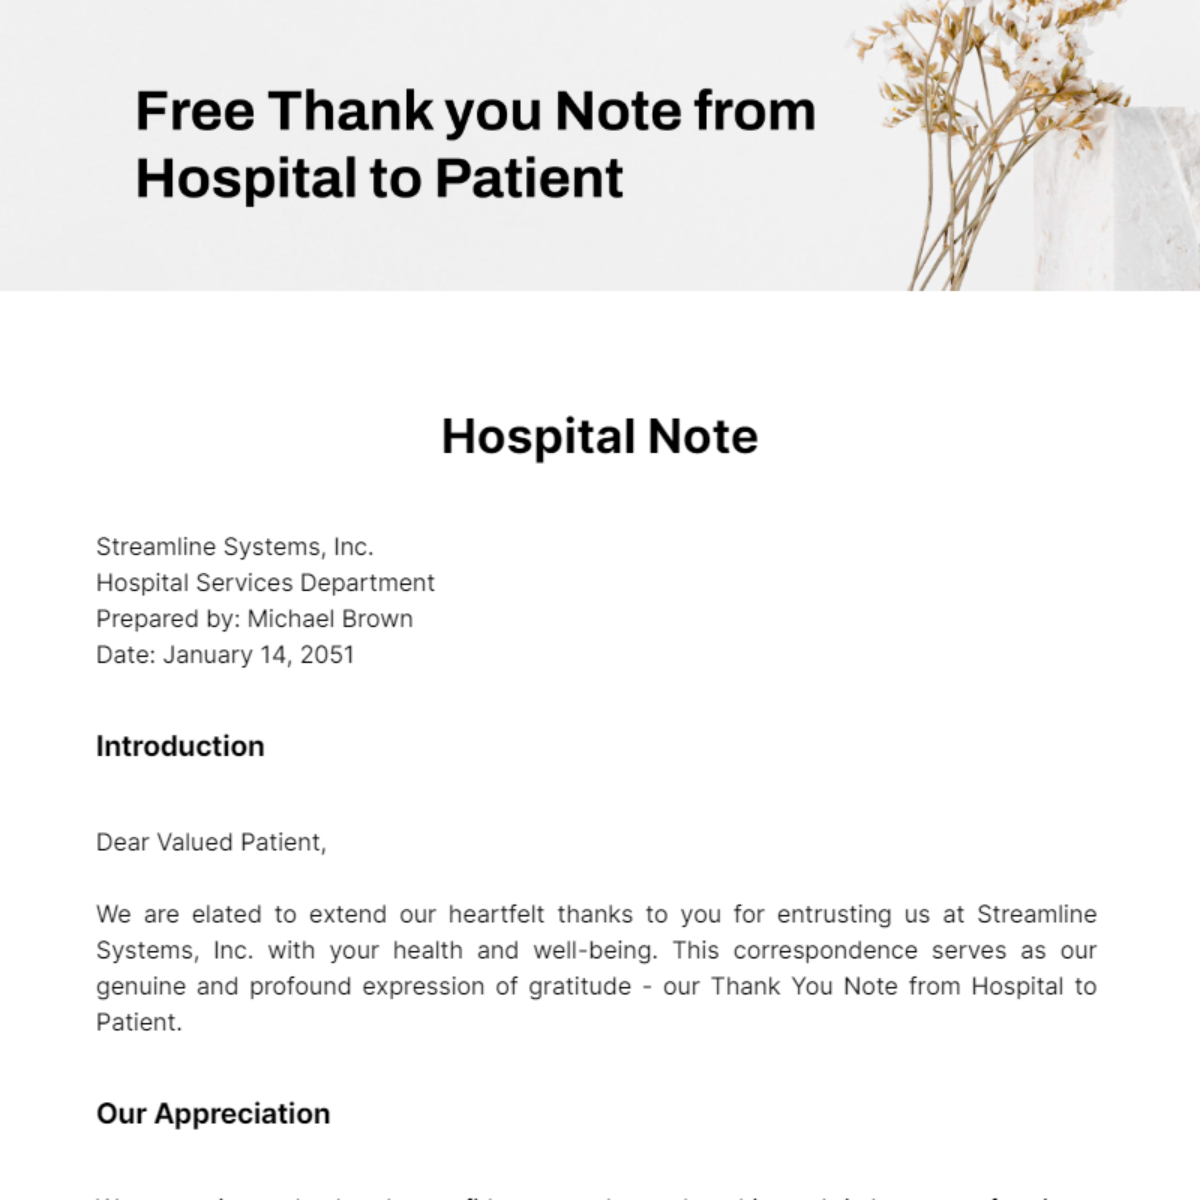 Free Thank you Note from Hospital to Patient Template